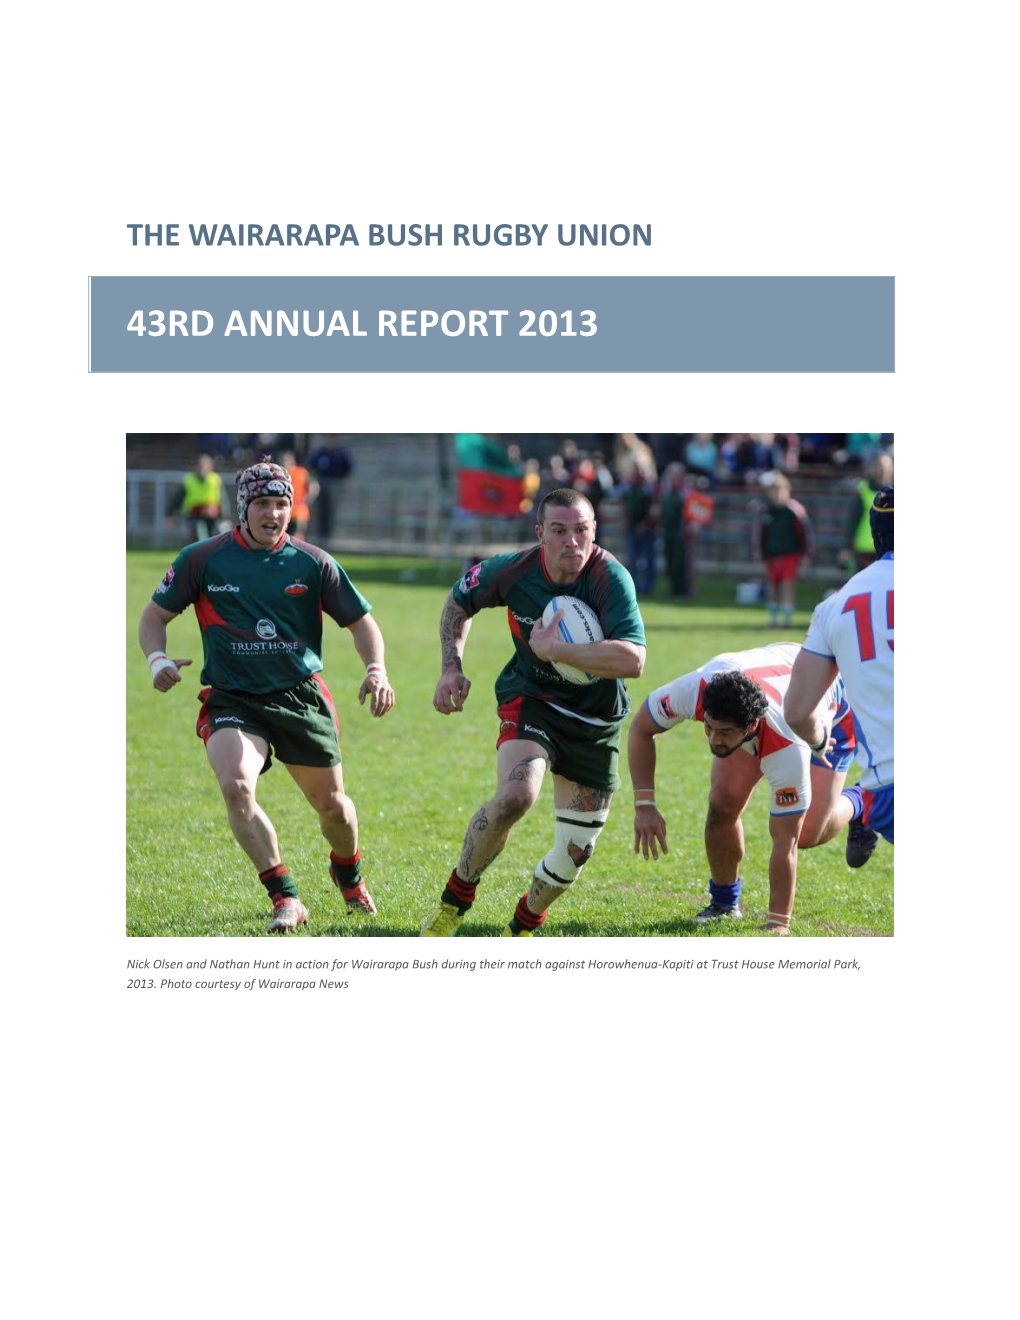 The Wairarapa Bush Rugby Union 43Rd Annual Report 2013